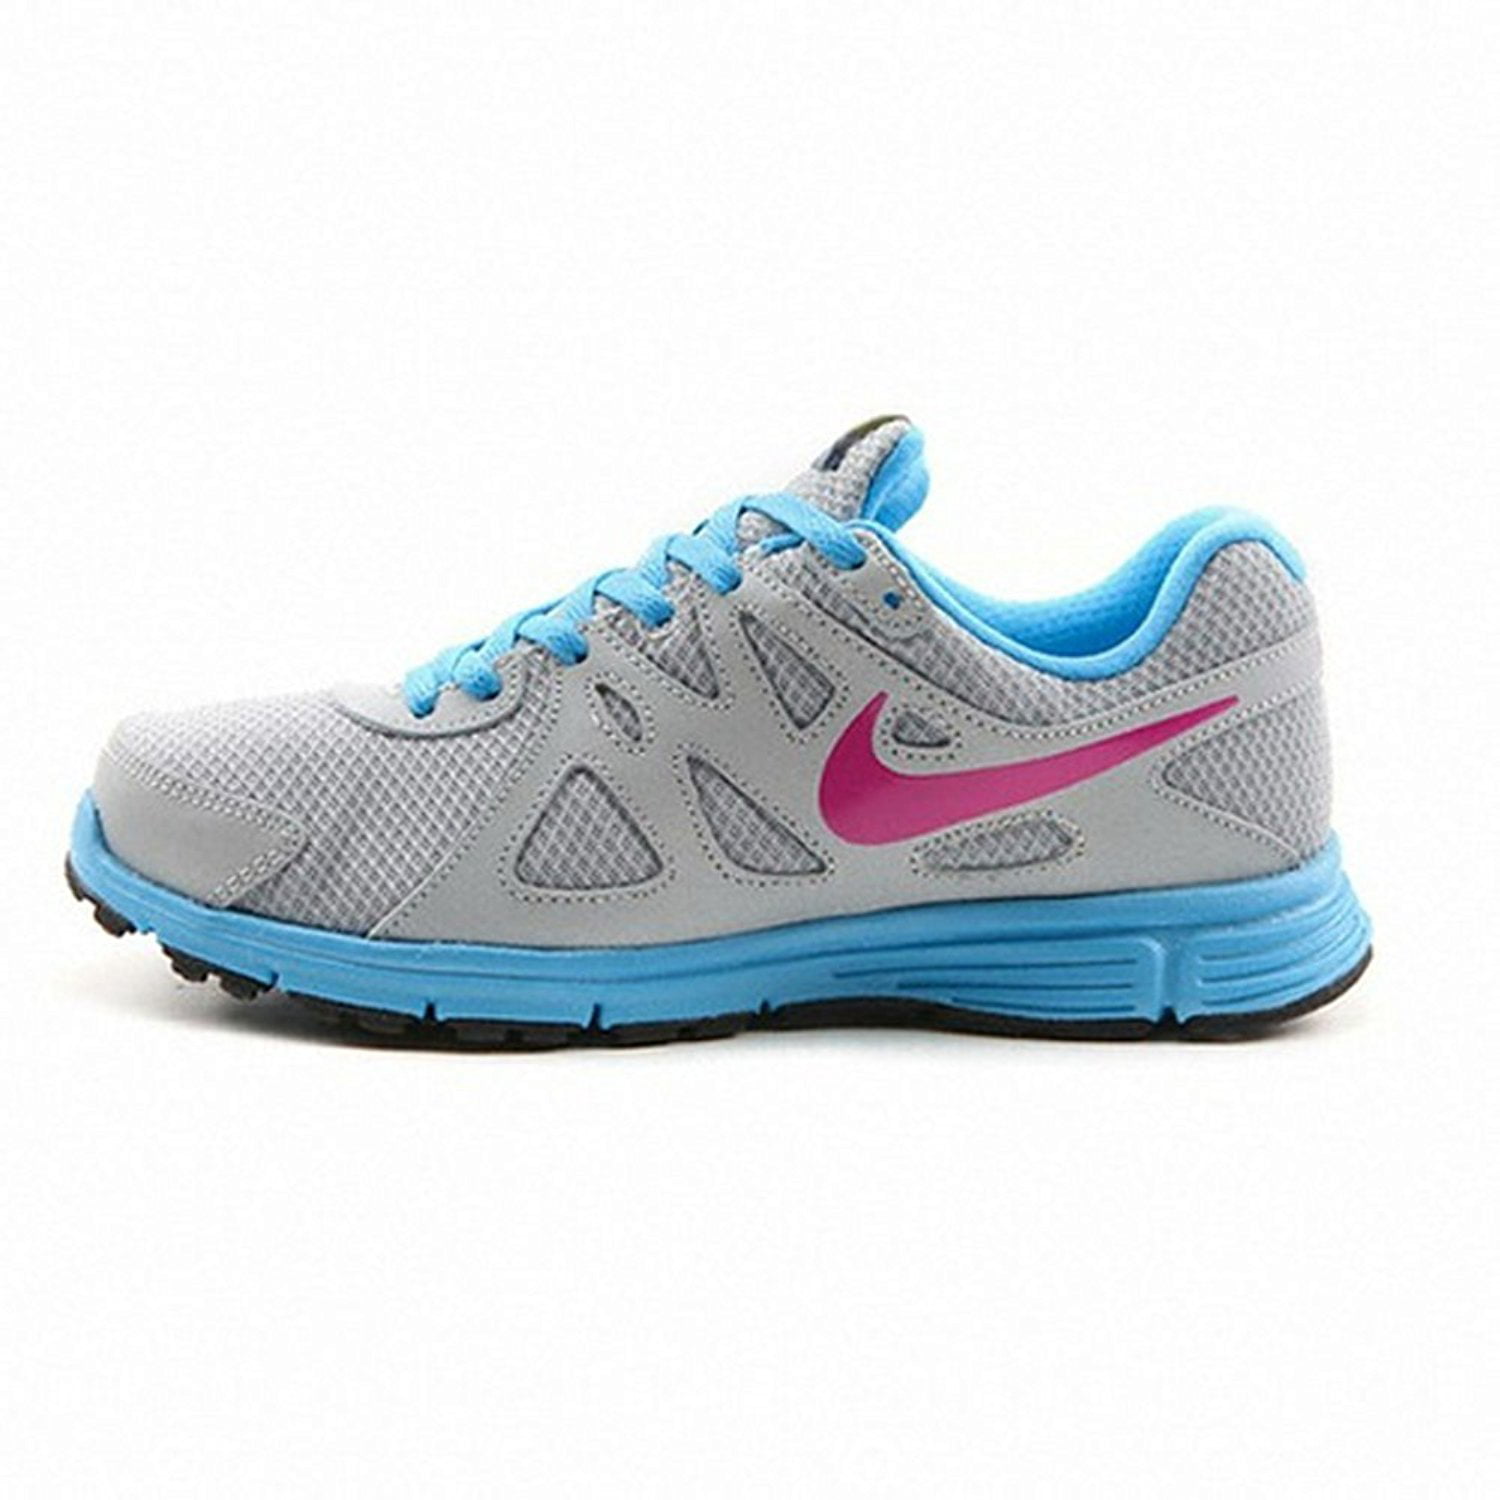 nike revolution 2 gs youth pink